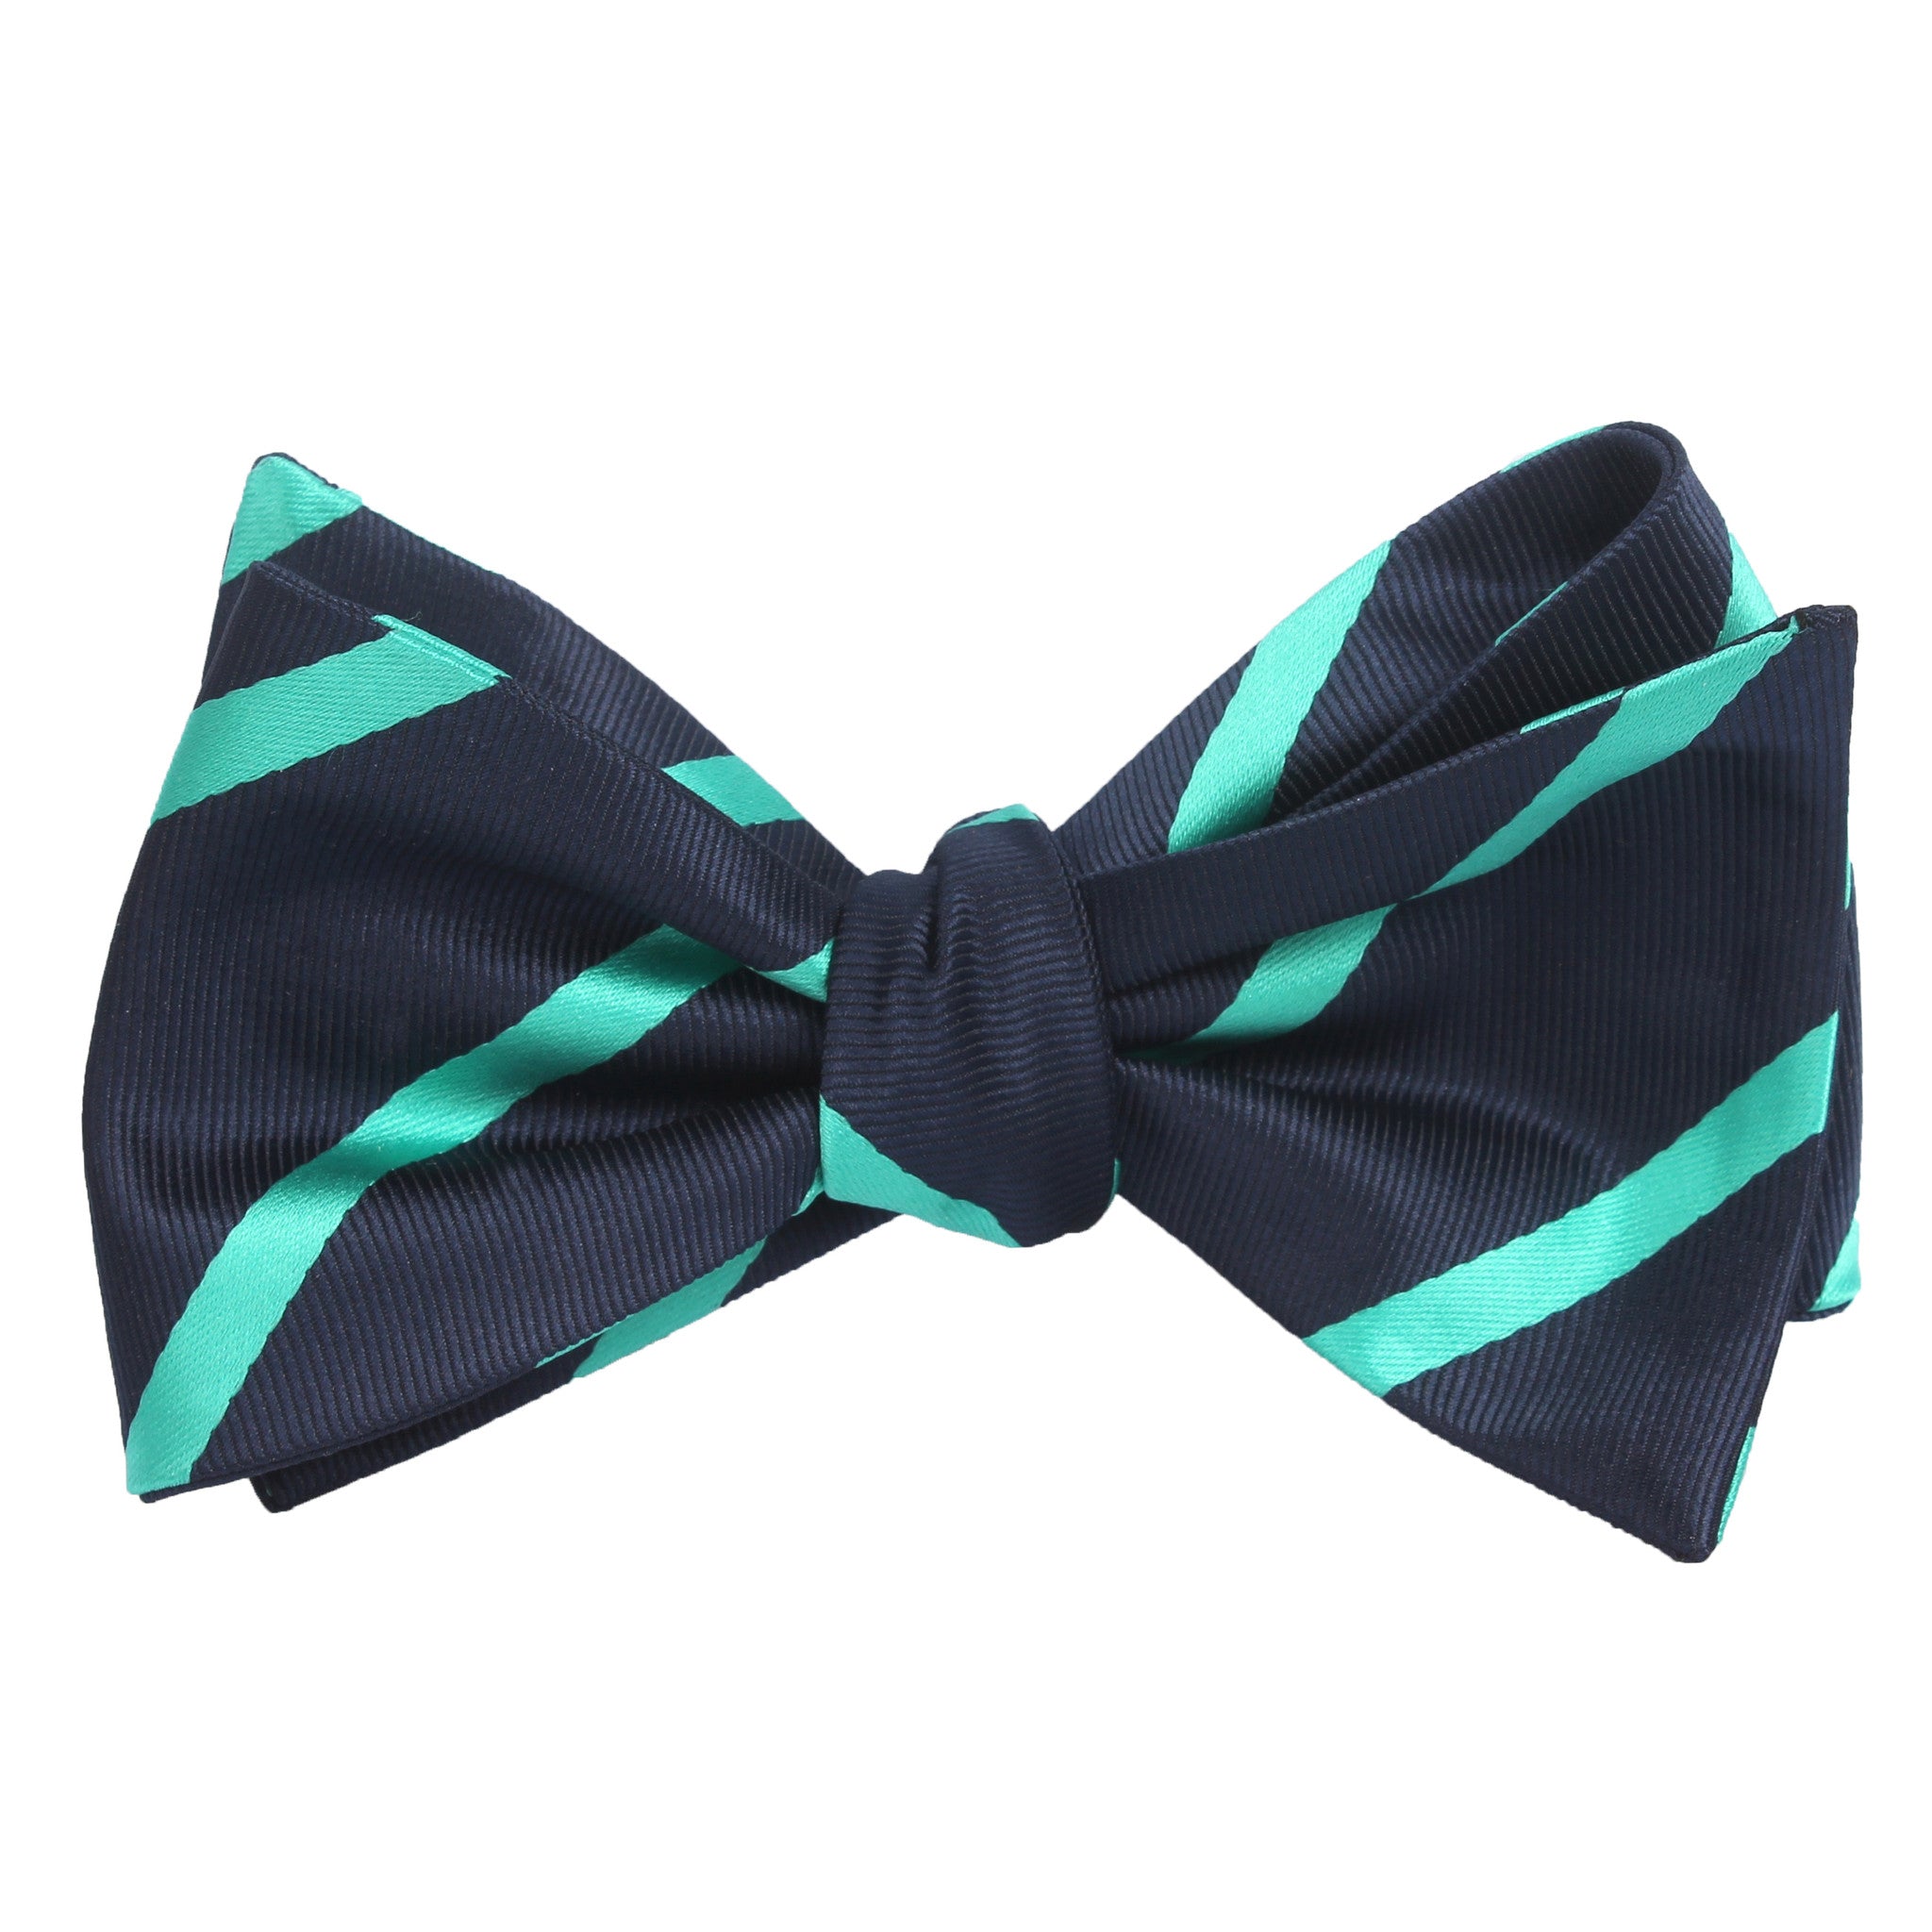 Navy Blue Bow Tie Untied with Striped Light Blue Self tied knot by OTAA